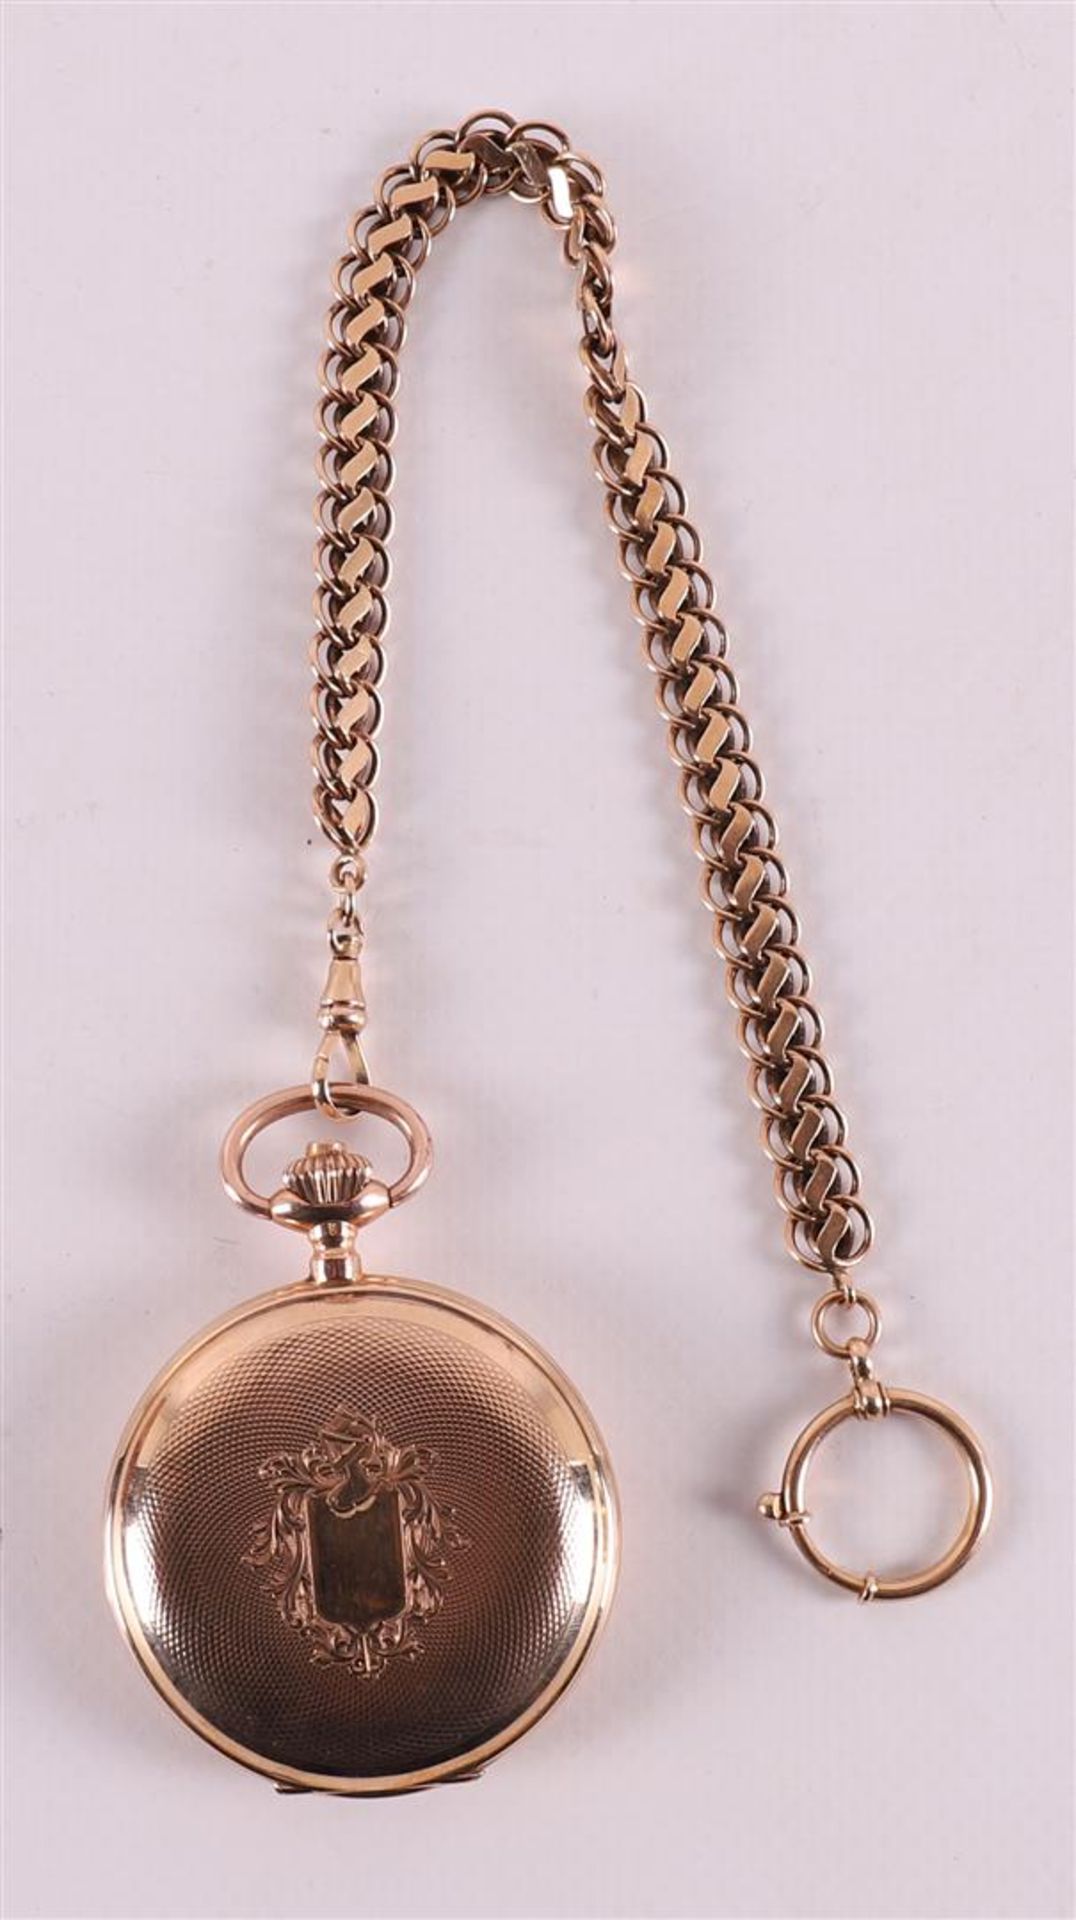 An Ancre Ligne droite men's vest pocket watch in a 14 kt case and ditto chain. - Image 4 of 5